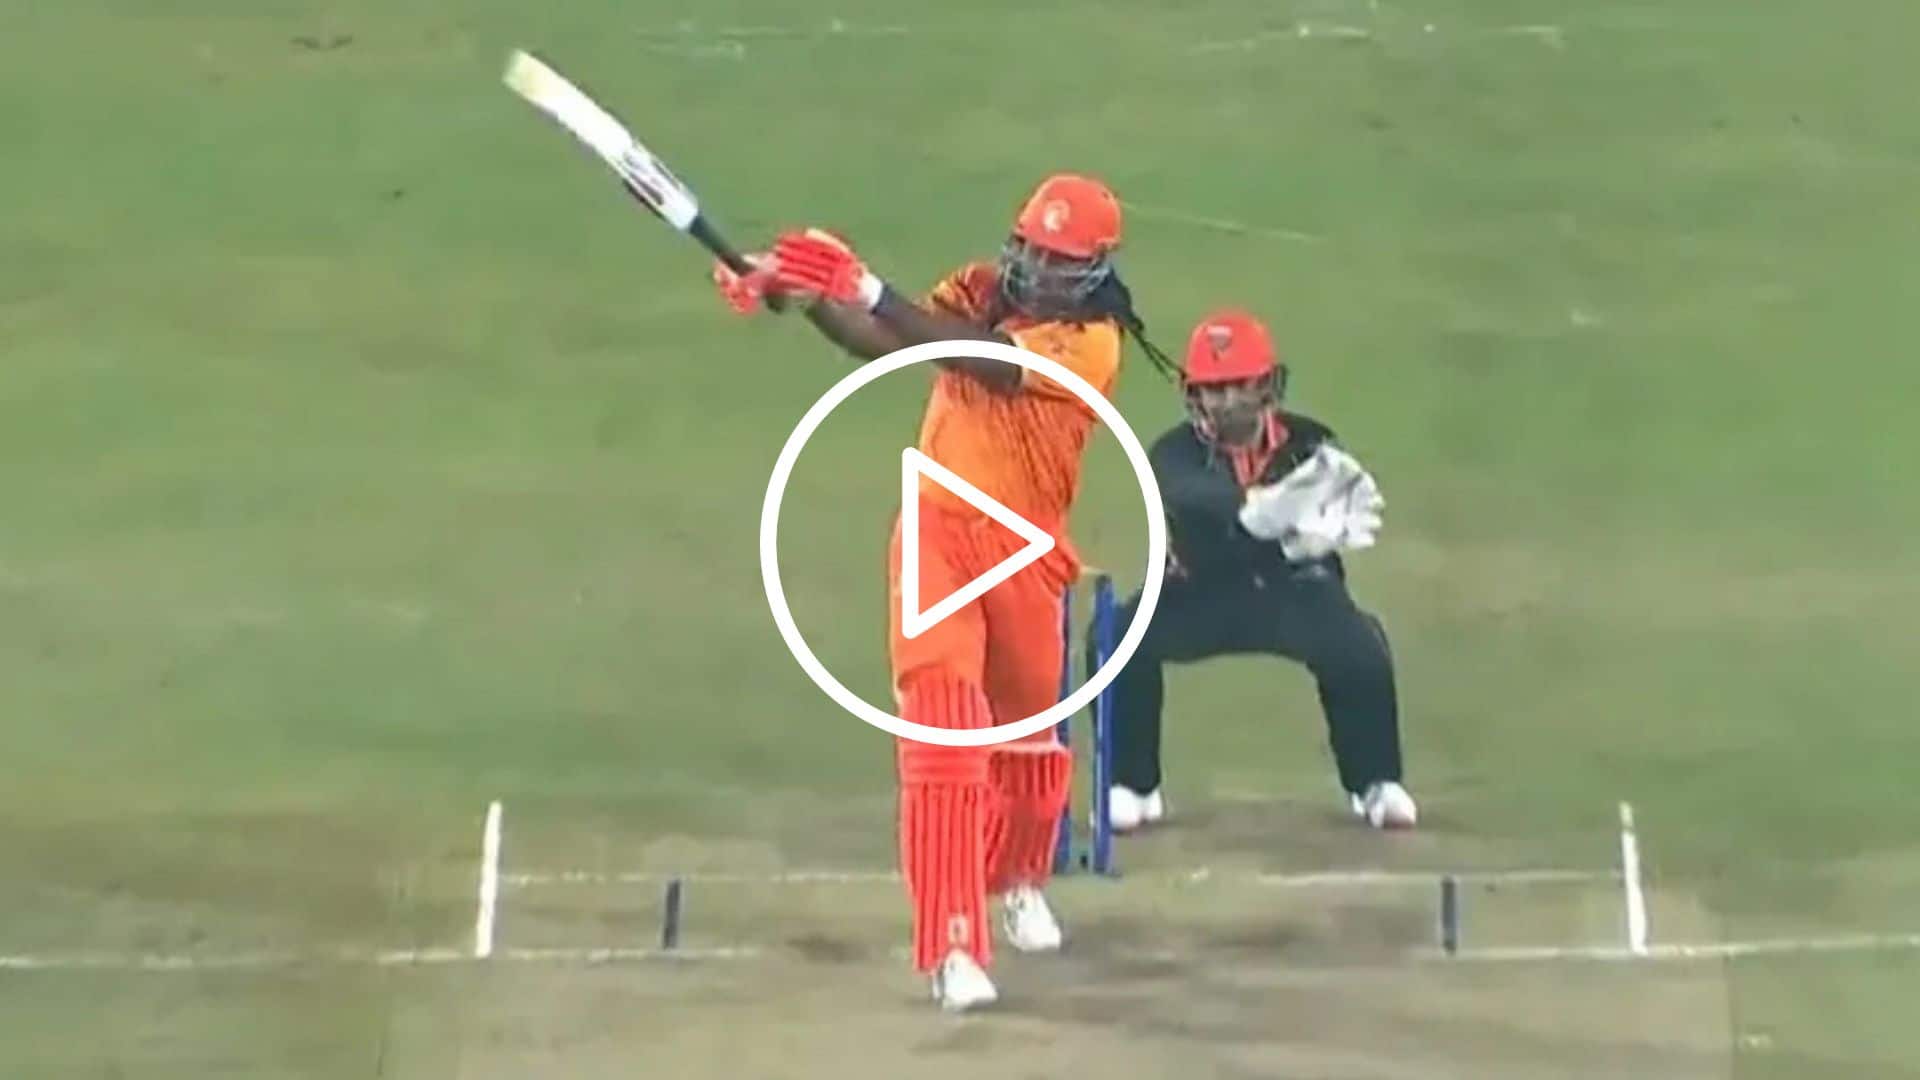 [Watch] Chris Gayle's 'One-Handed' Six Leaves Everyone In Awe, Redefines Age is Just A Number